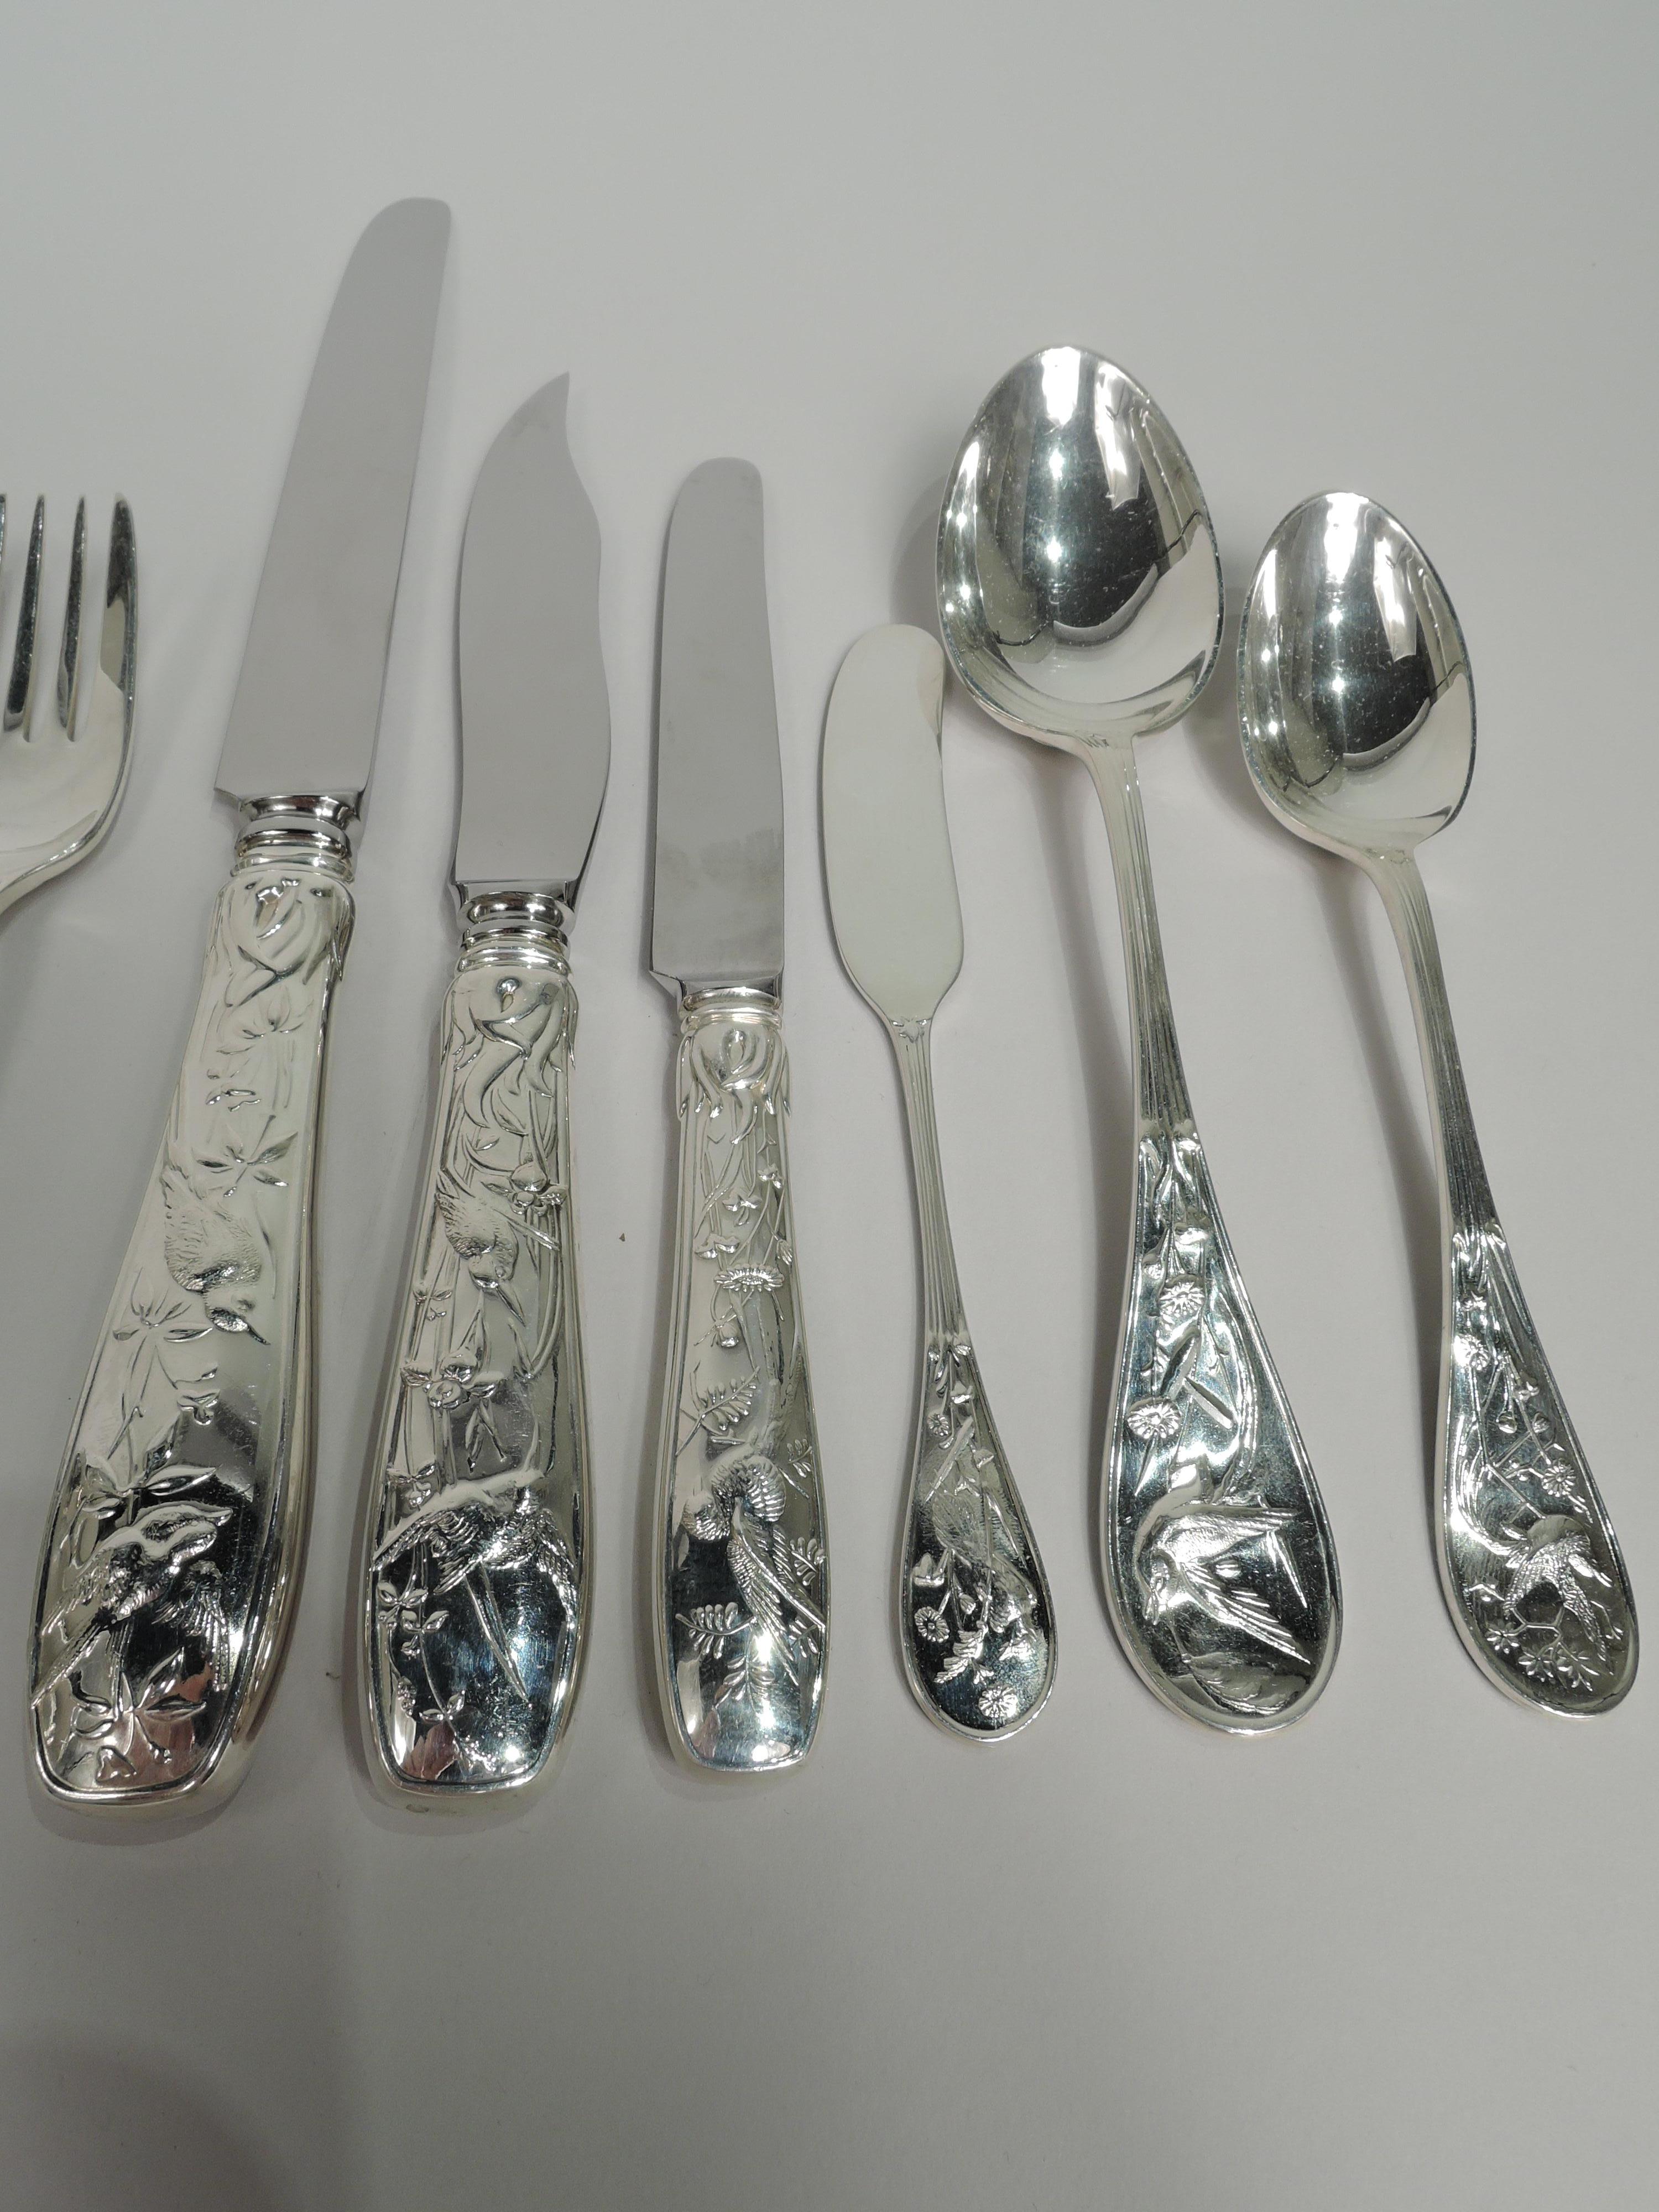 Aesthetic Movement Tiffany Audubon Sterling Silver Dinner Set for 6 with 68 Pieces